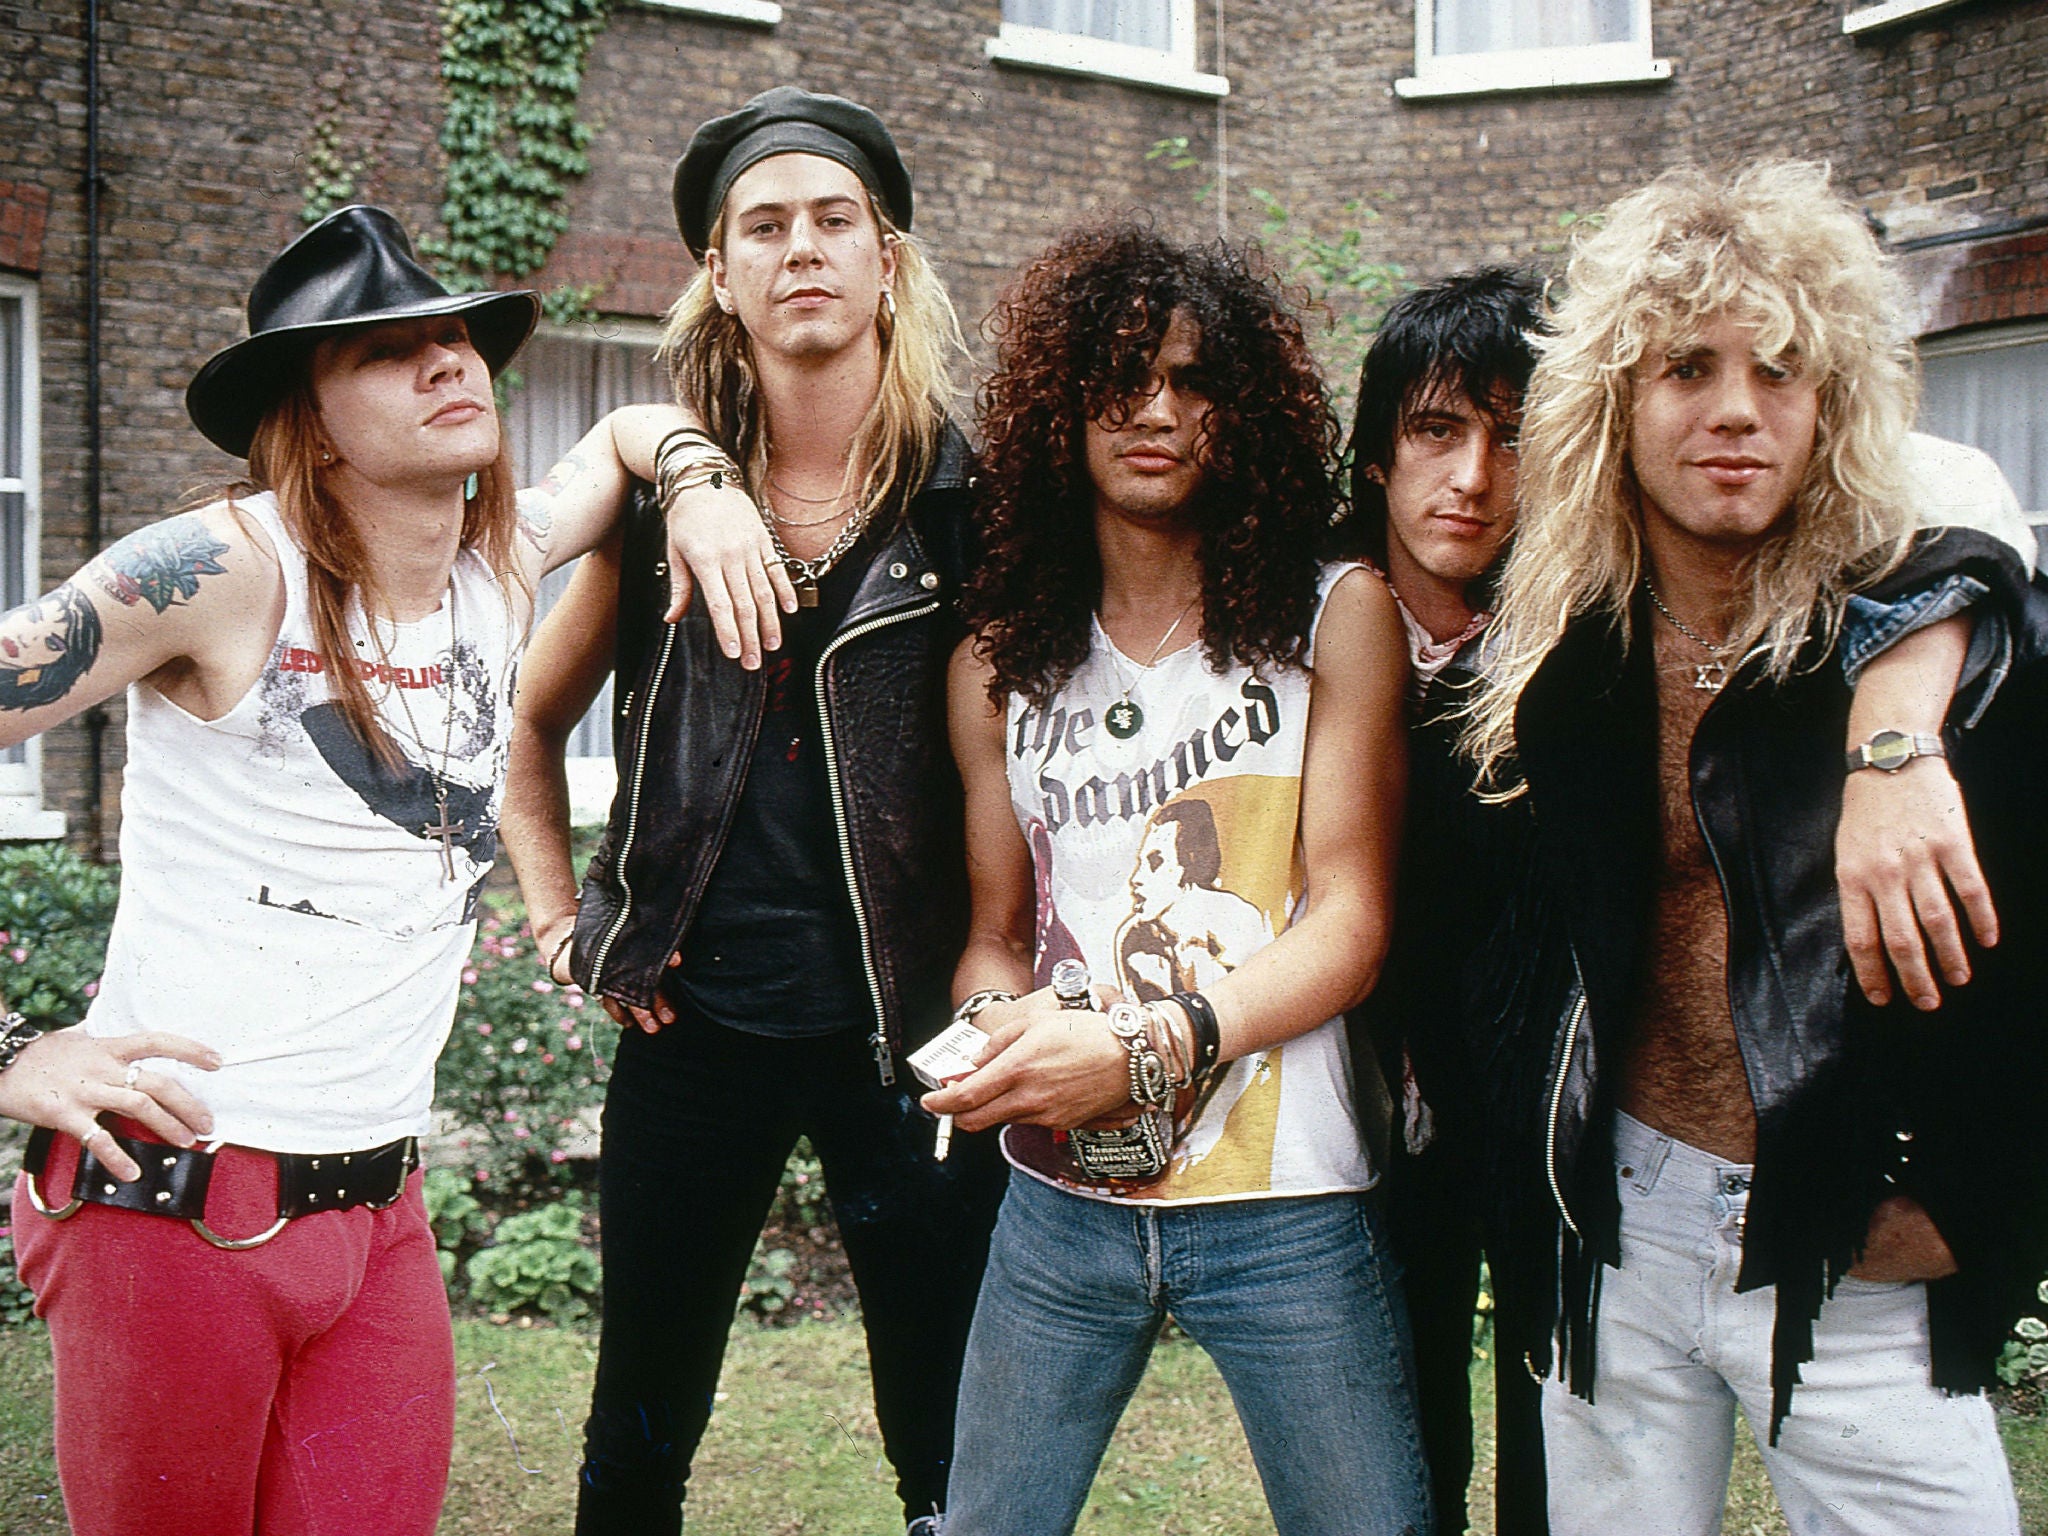 Guns N' Roses reunion 2016: Axl Rose and Slash expected to return for tour, The Independent